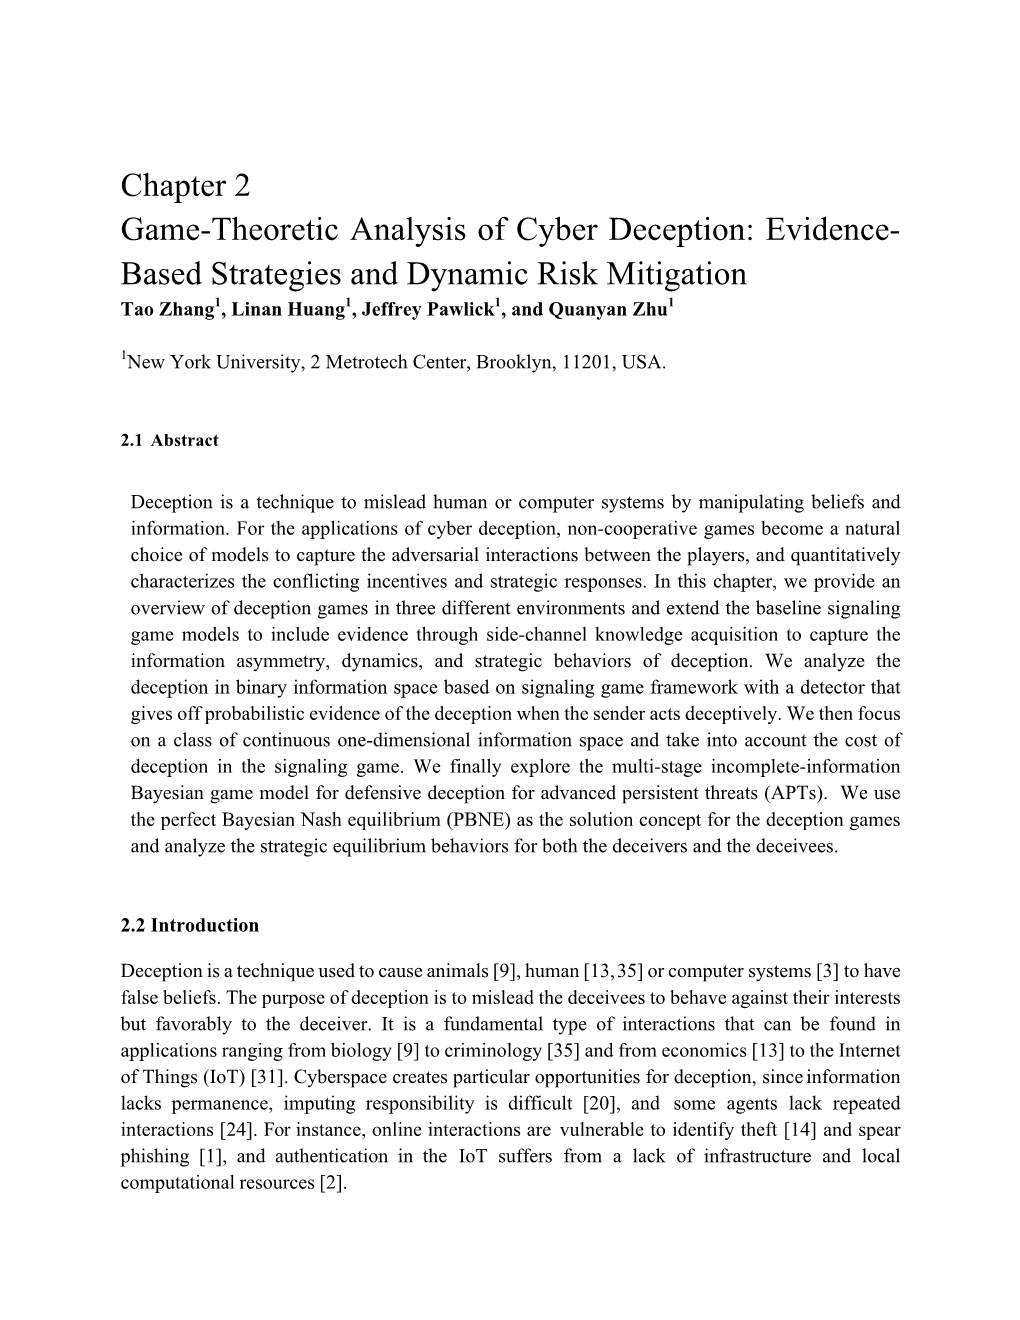 Chapter 2 Game-Theoretic Analysis of Cyber Deception: Evidence